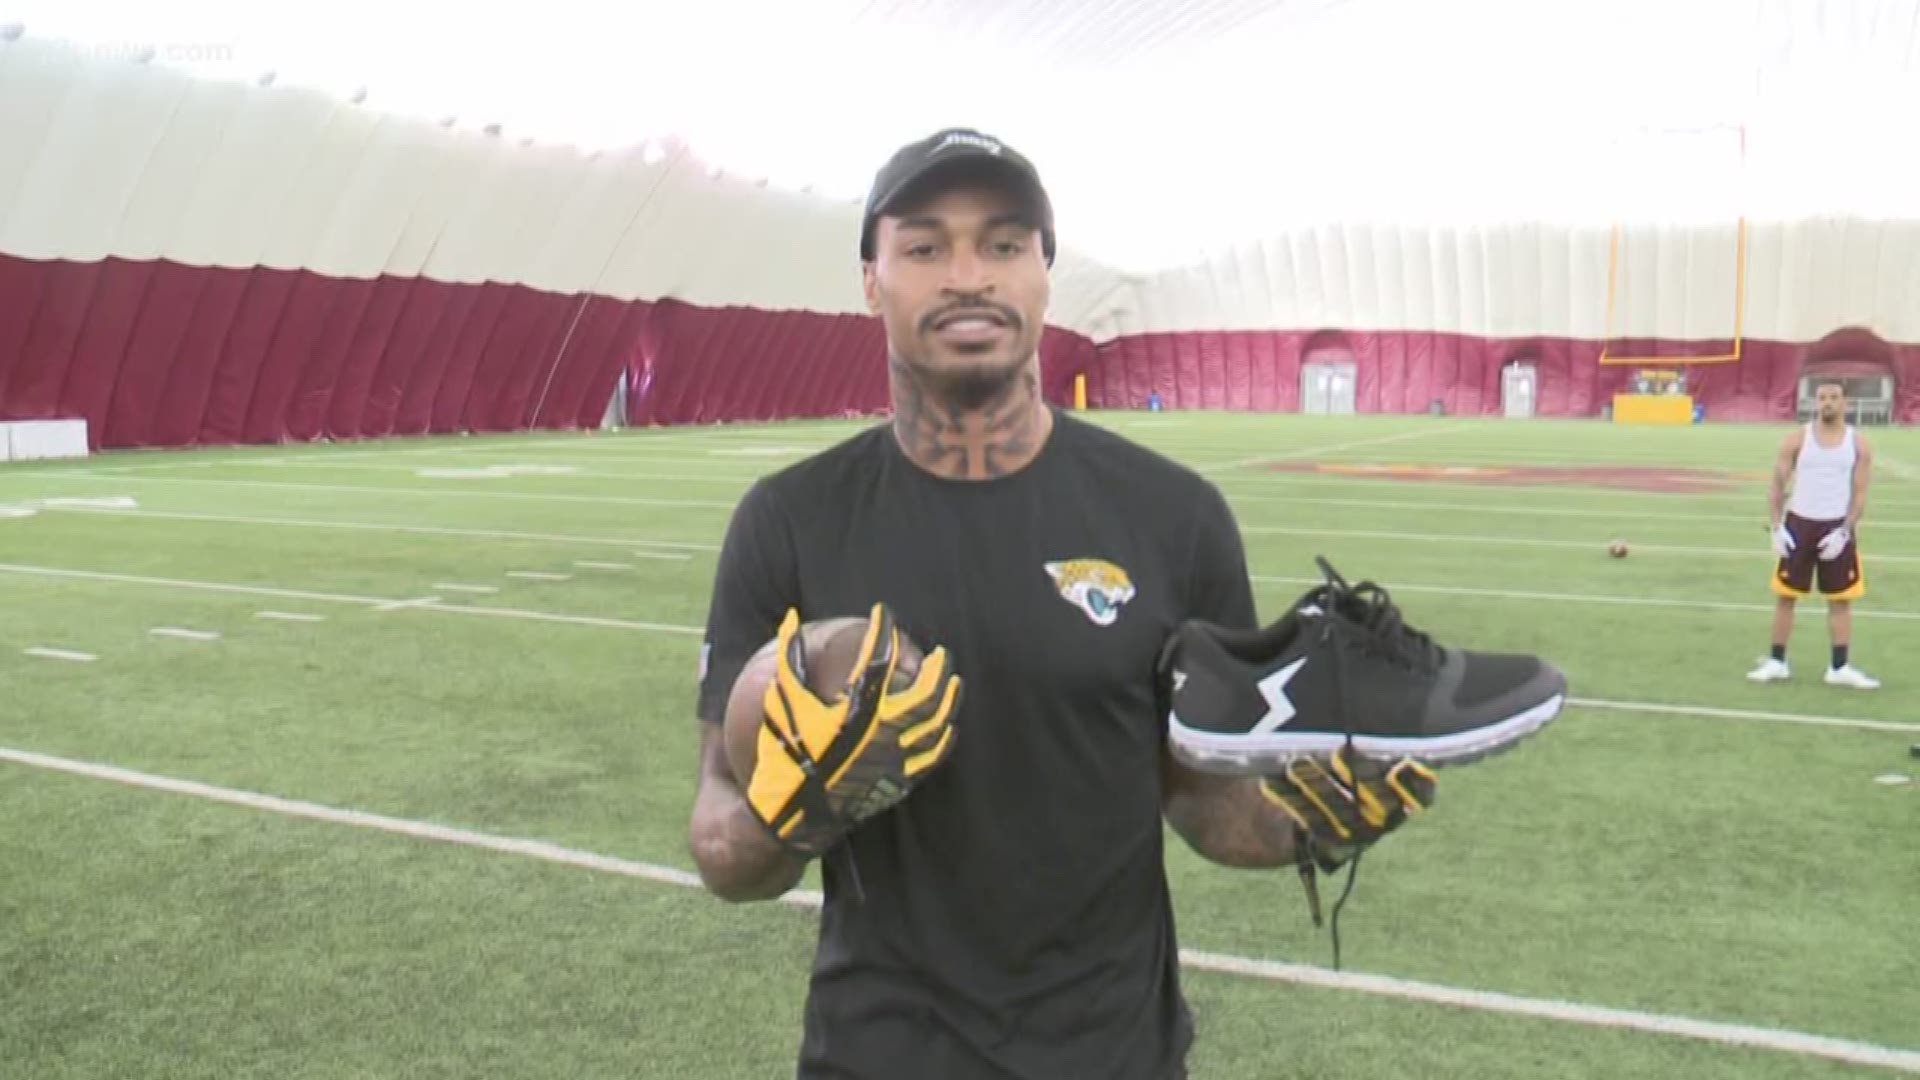 Former ASU wideout Jaelen Strong is rehabbing from ACL surgery last December, but he's also working on a new line of affordable training shoes.